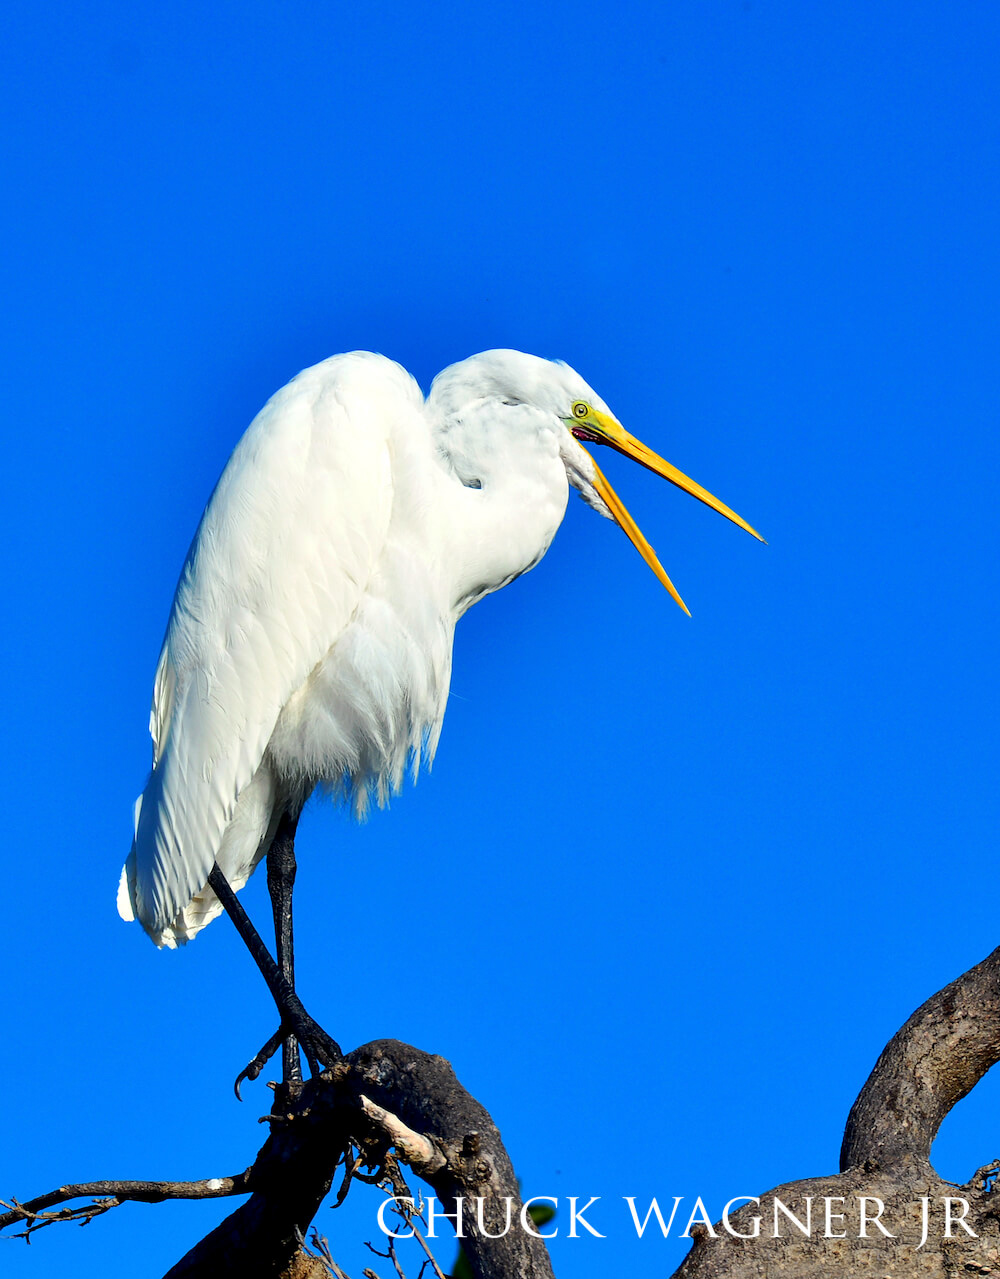 White egret perched on a branch, mouth agape, against a clear blue sky.